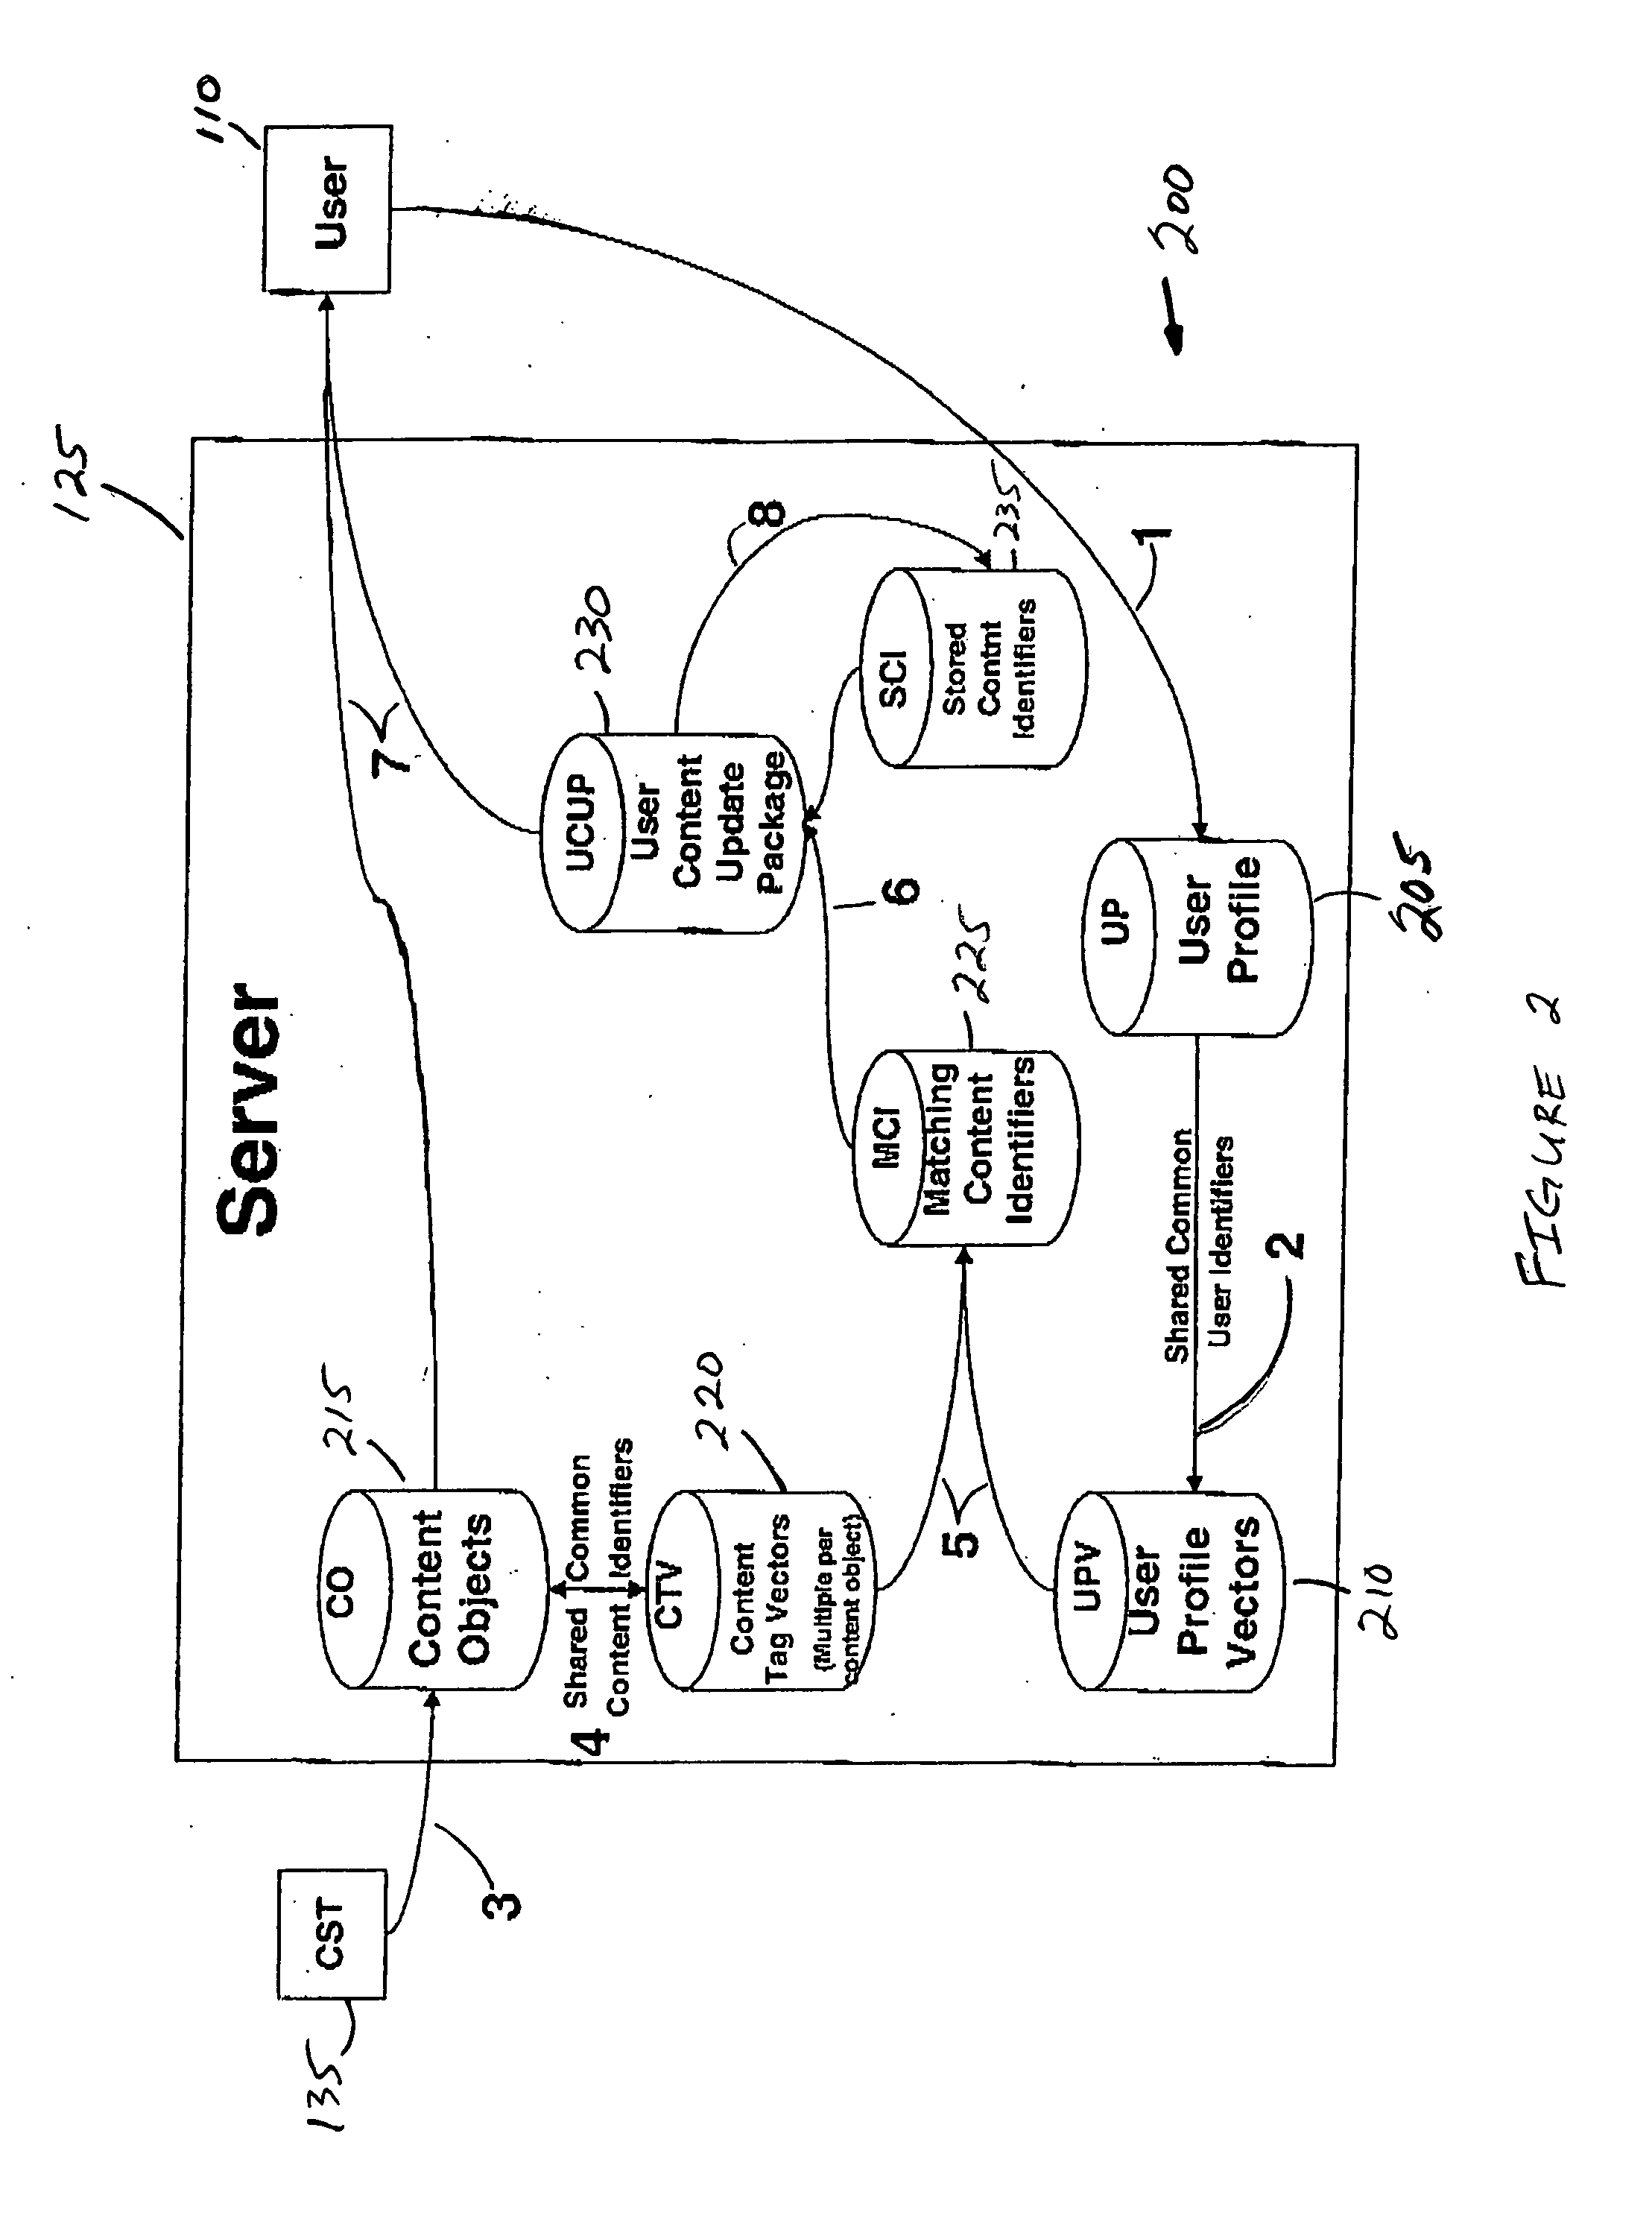 Method and system for matching appropriate content with users by matching content tags and profiles